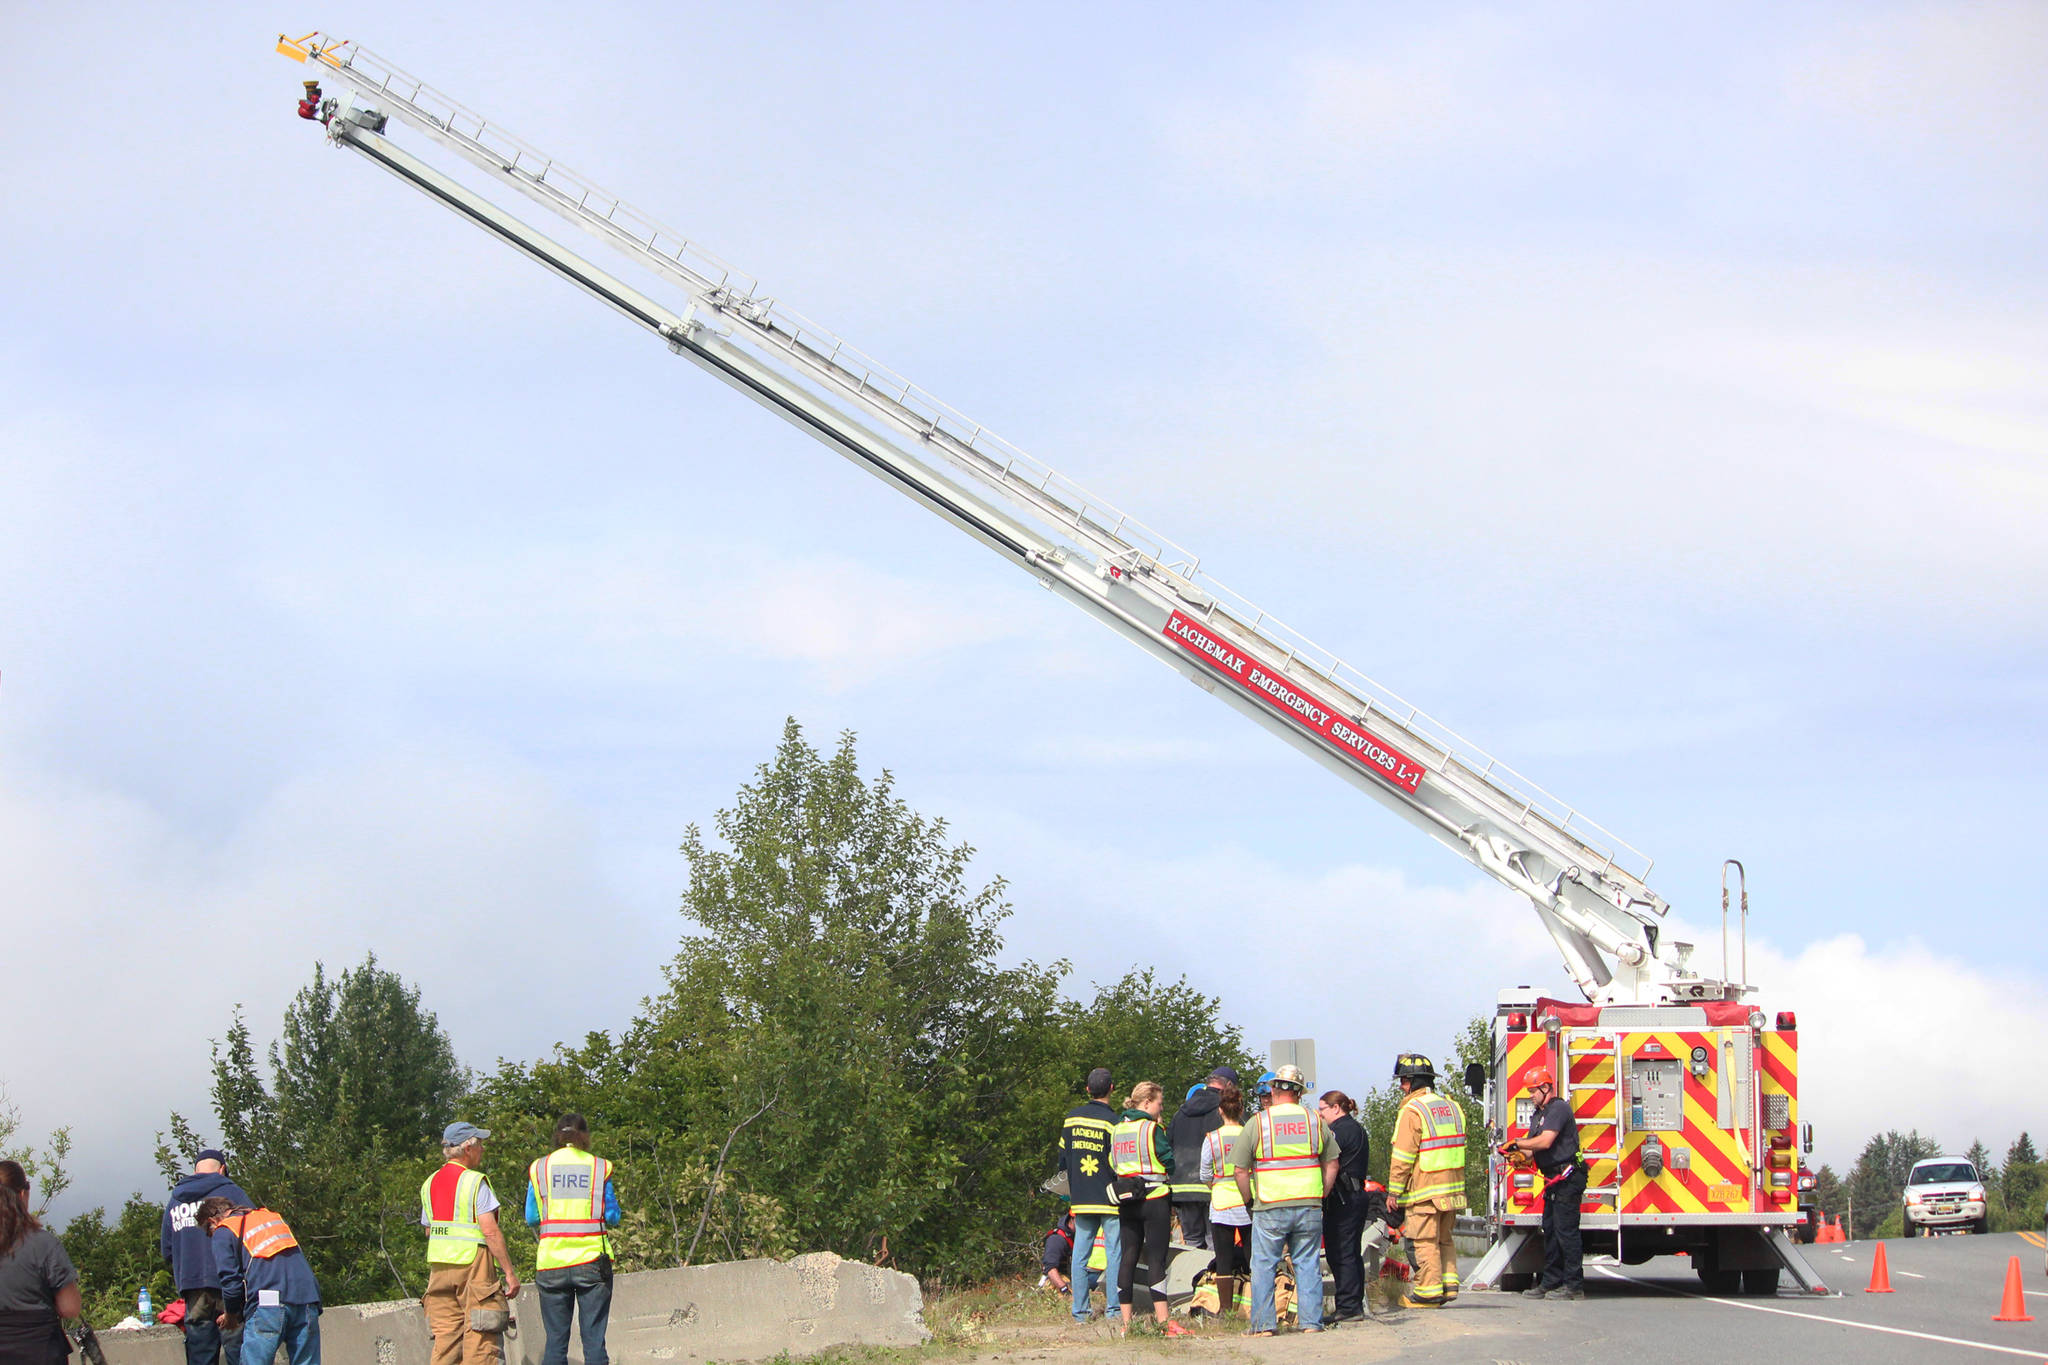 First responders wait while a ladder truck is set up to allow firefighters to climb up and get a better view of the slope near Baycrest Overlook on Monday, July 24, 2017 in Homer, Alaska. First responders found a pickup truck that had fallen over the edge after hitting a guardrail, and searched for a possible victim until getting a report that the driver had crashed several days earlier and had walked away uninjured. Photo by Megan Pacer/Homer News